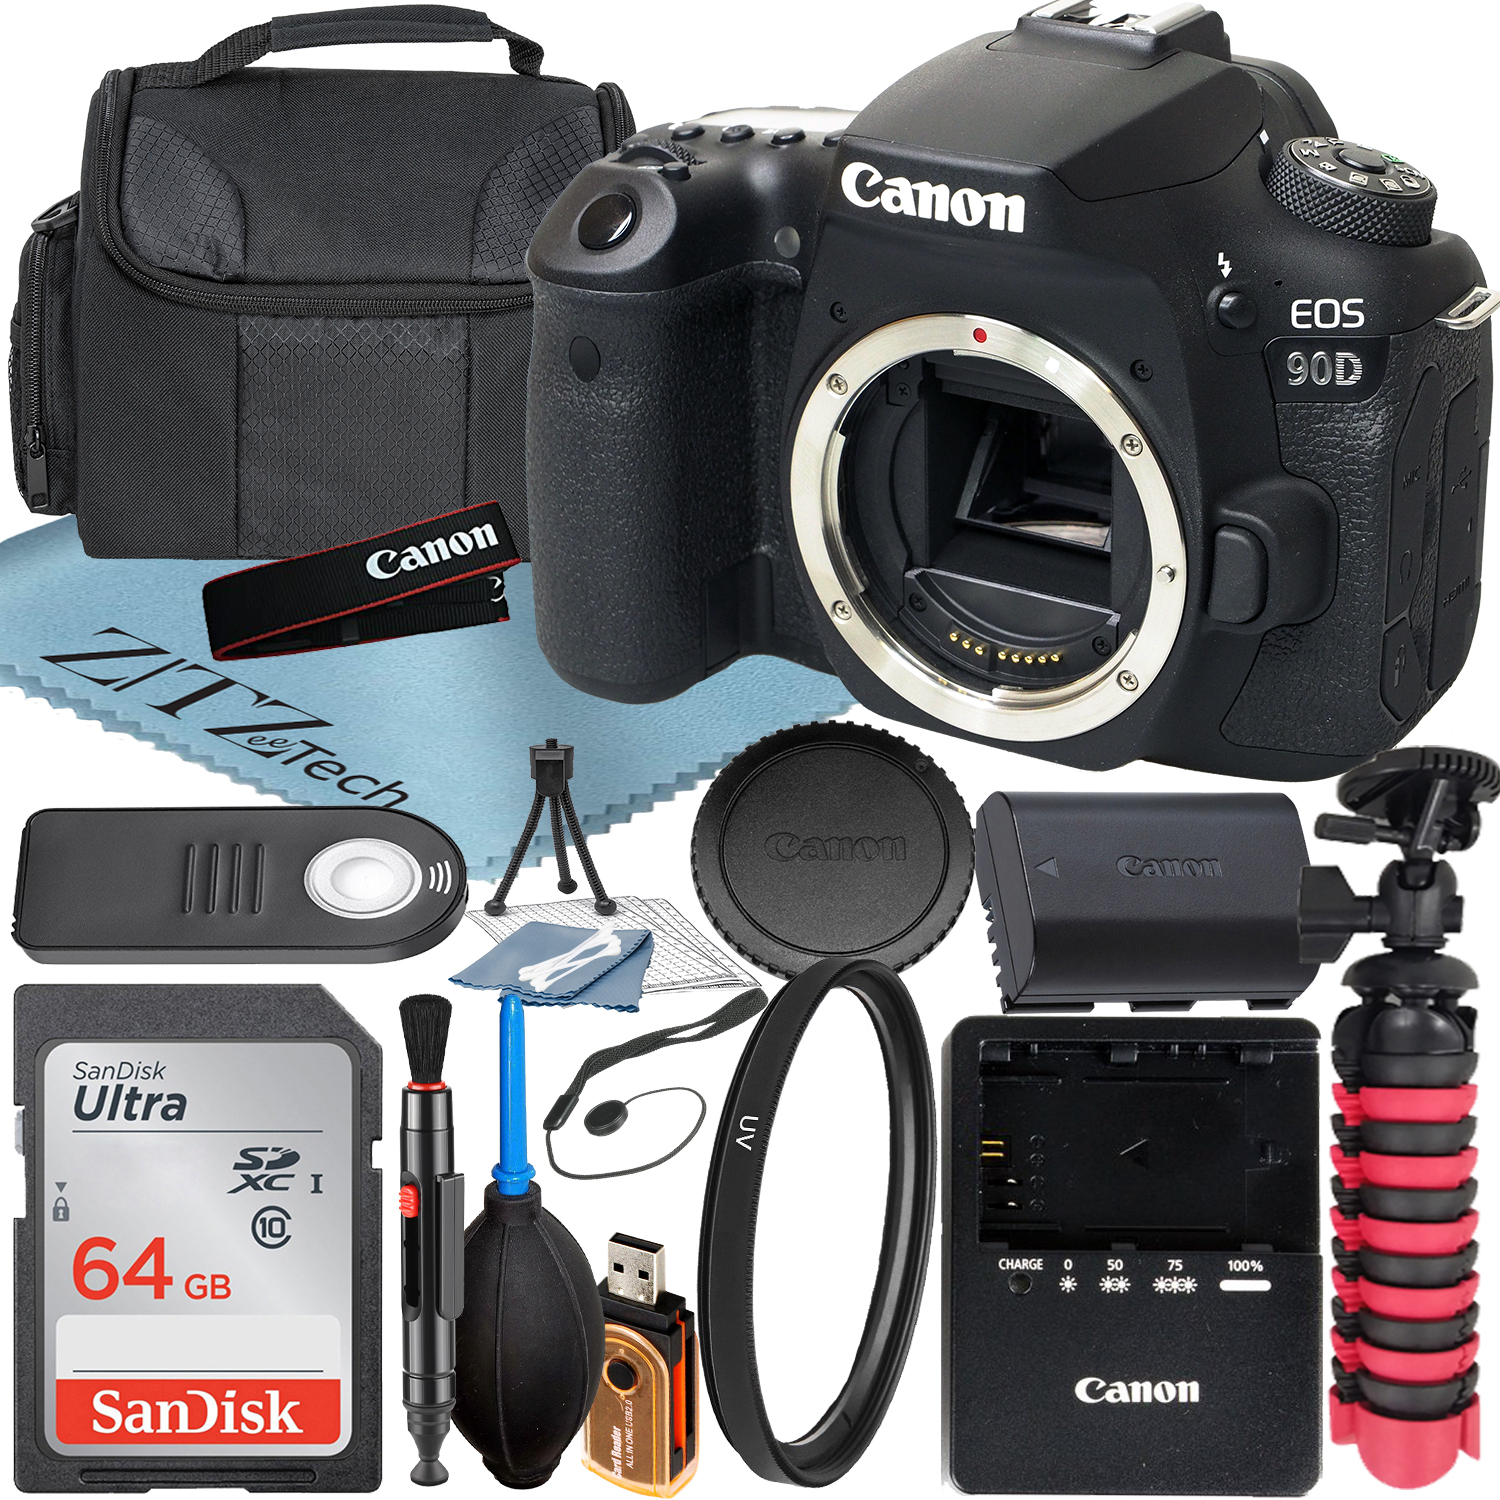 Canon EOS 90D DSLR Camera (Body Only) with 32.5MP CMOS Sensor + SanDisk 64GB Memory Card + Case + UV Filter + ZeeTech Accessory Bundle